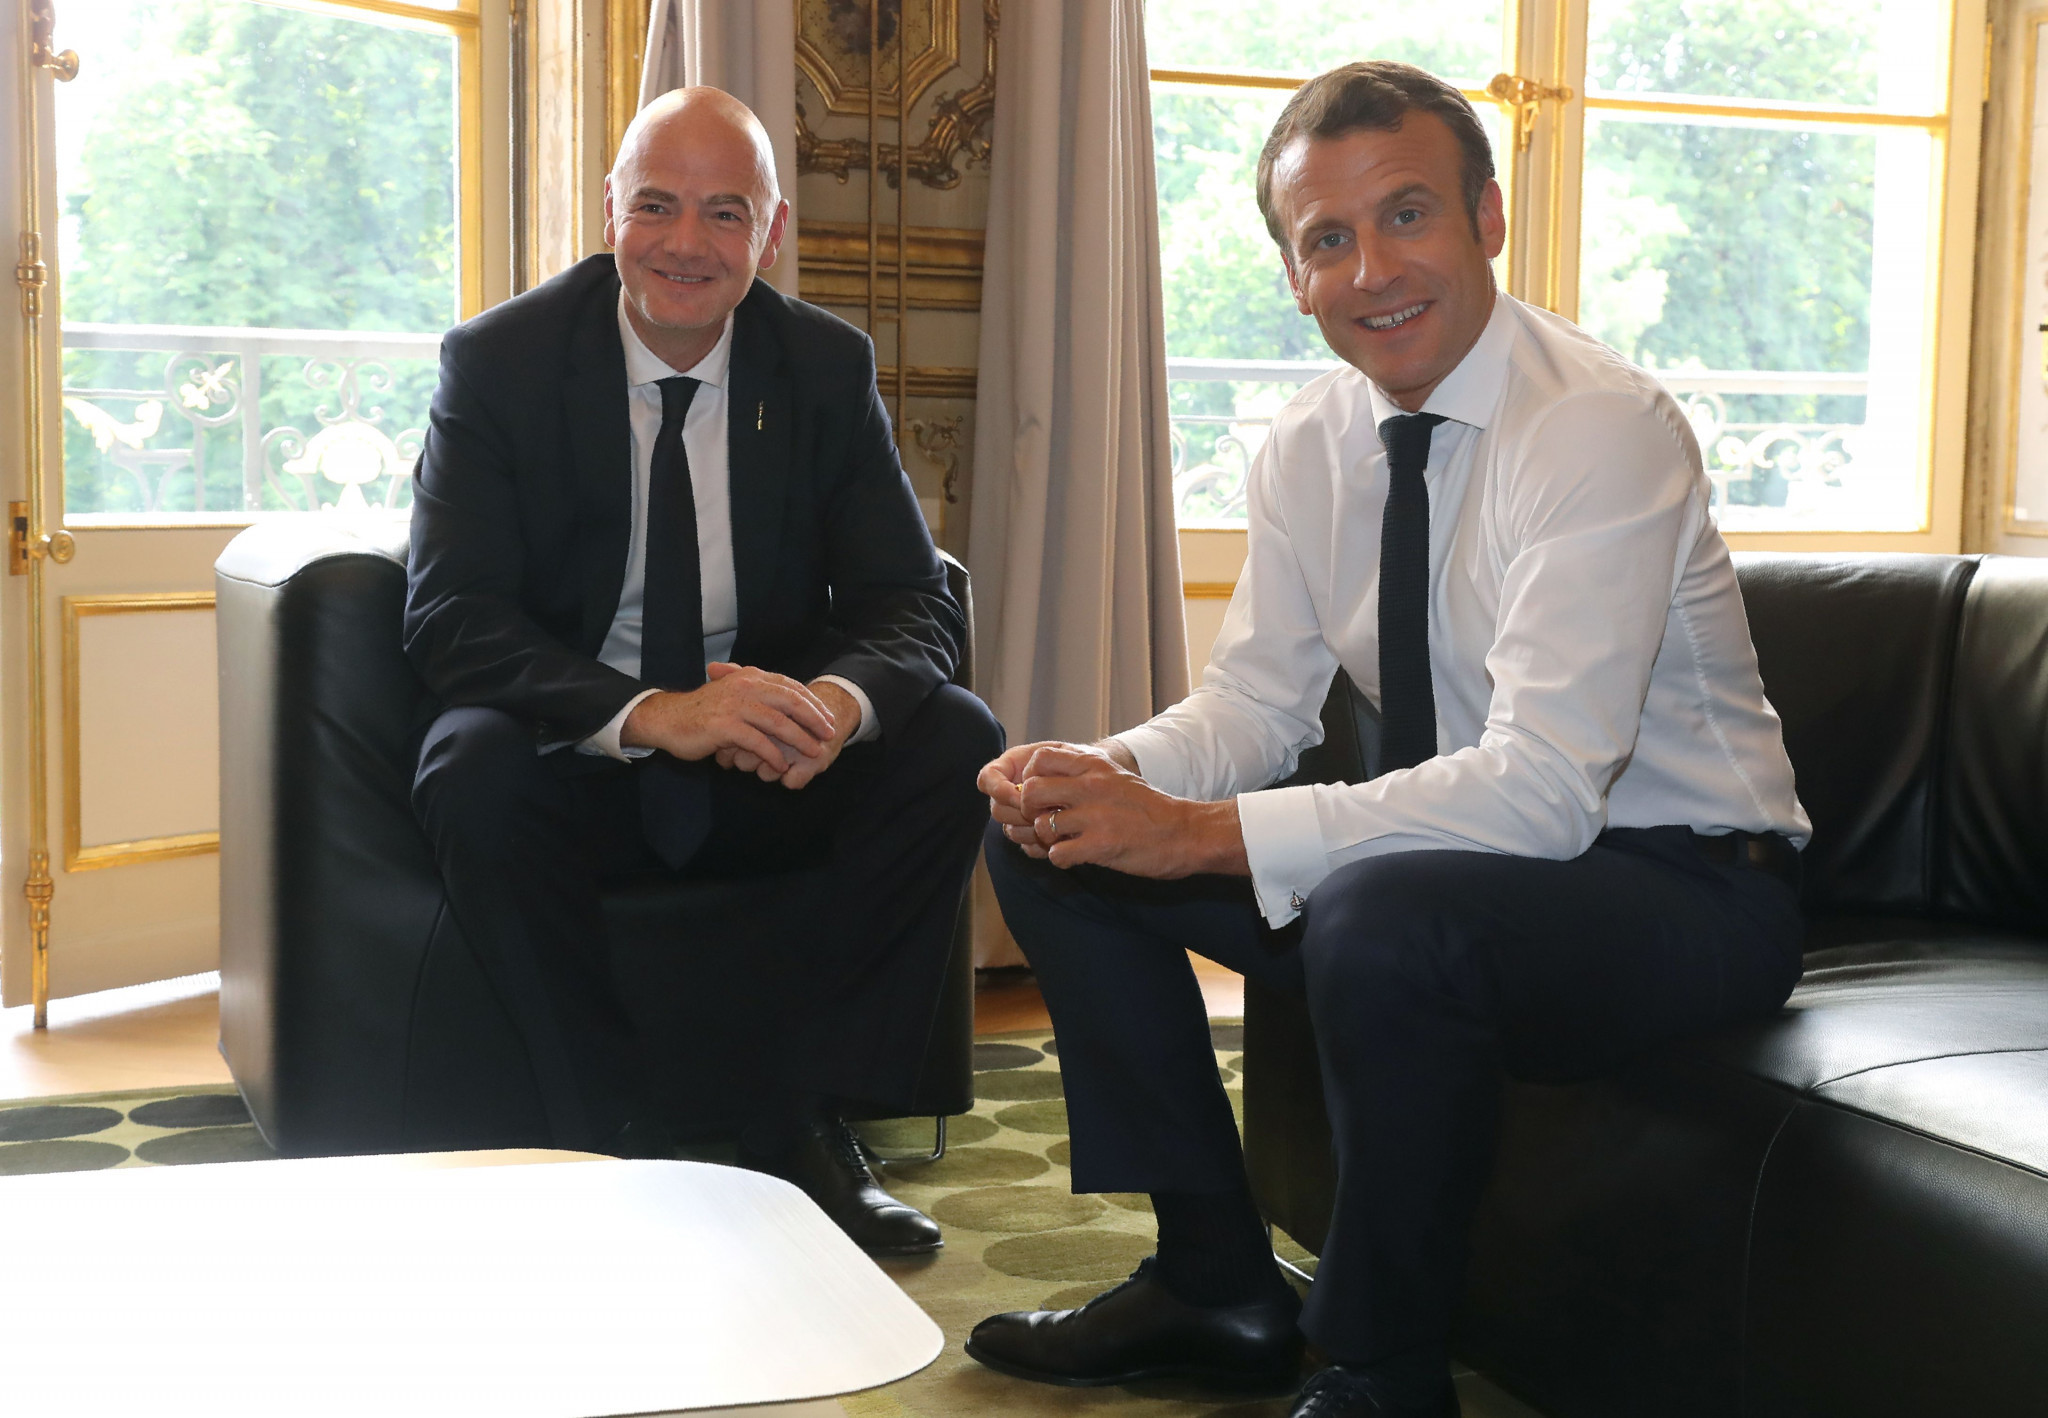 FIFA President Gianni Infantino has met French President Emmanuel Macron in Paris today ©Getty Images